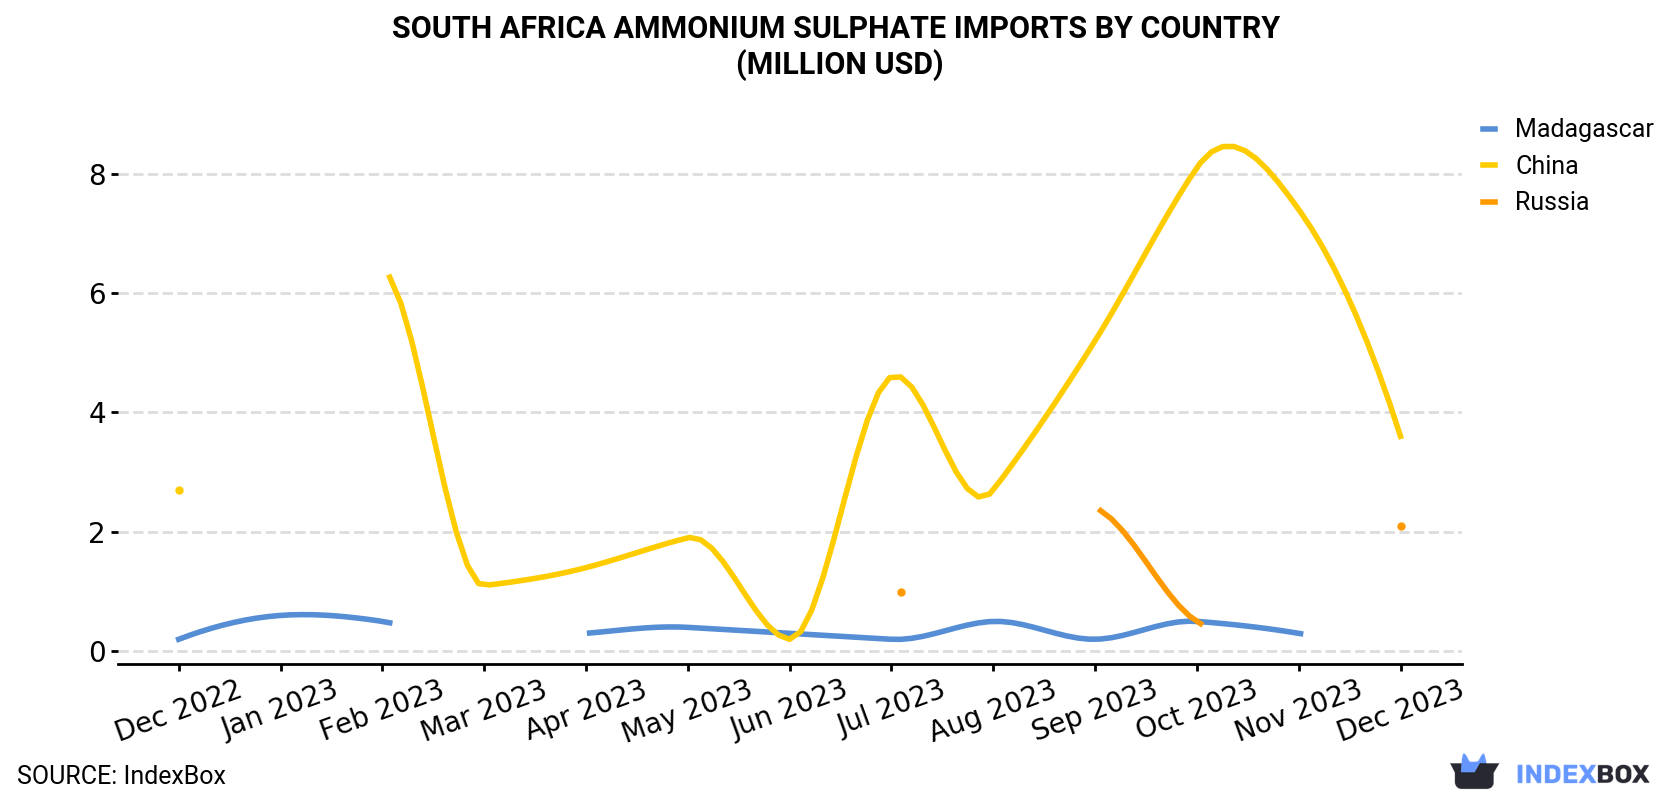 South Africa Ammonium Sulphate Imports By Country (Million USD)